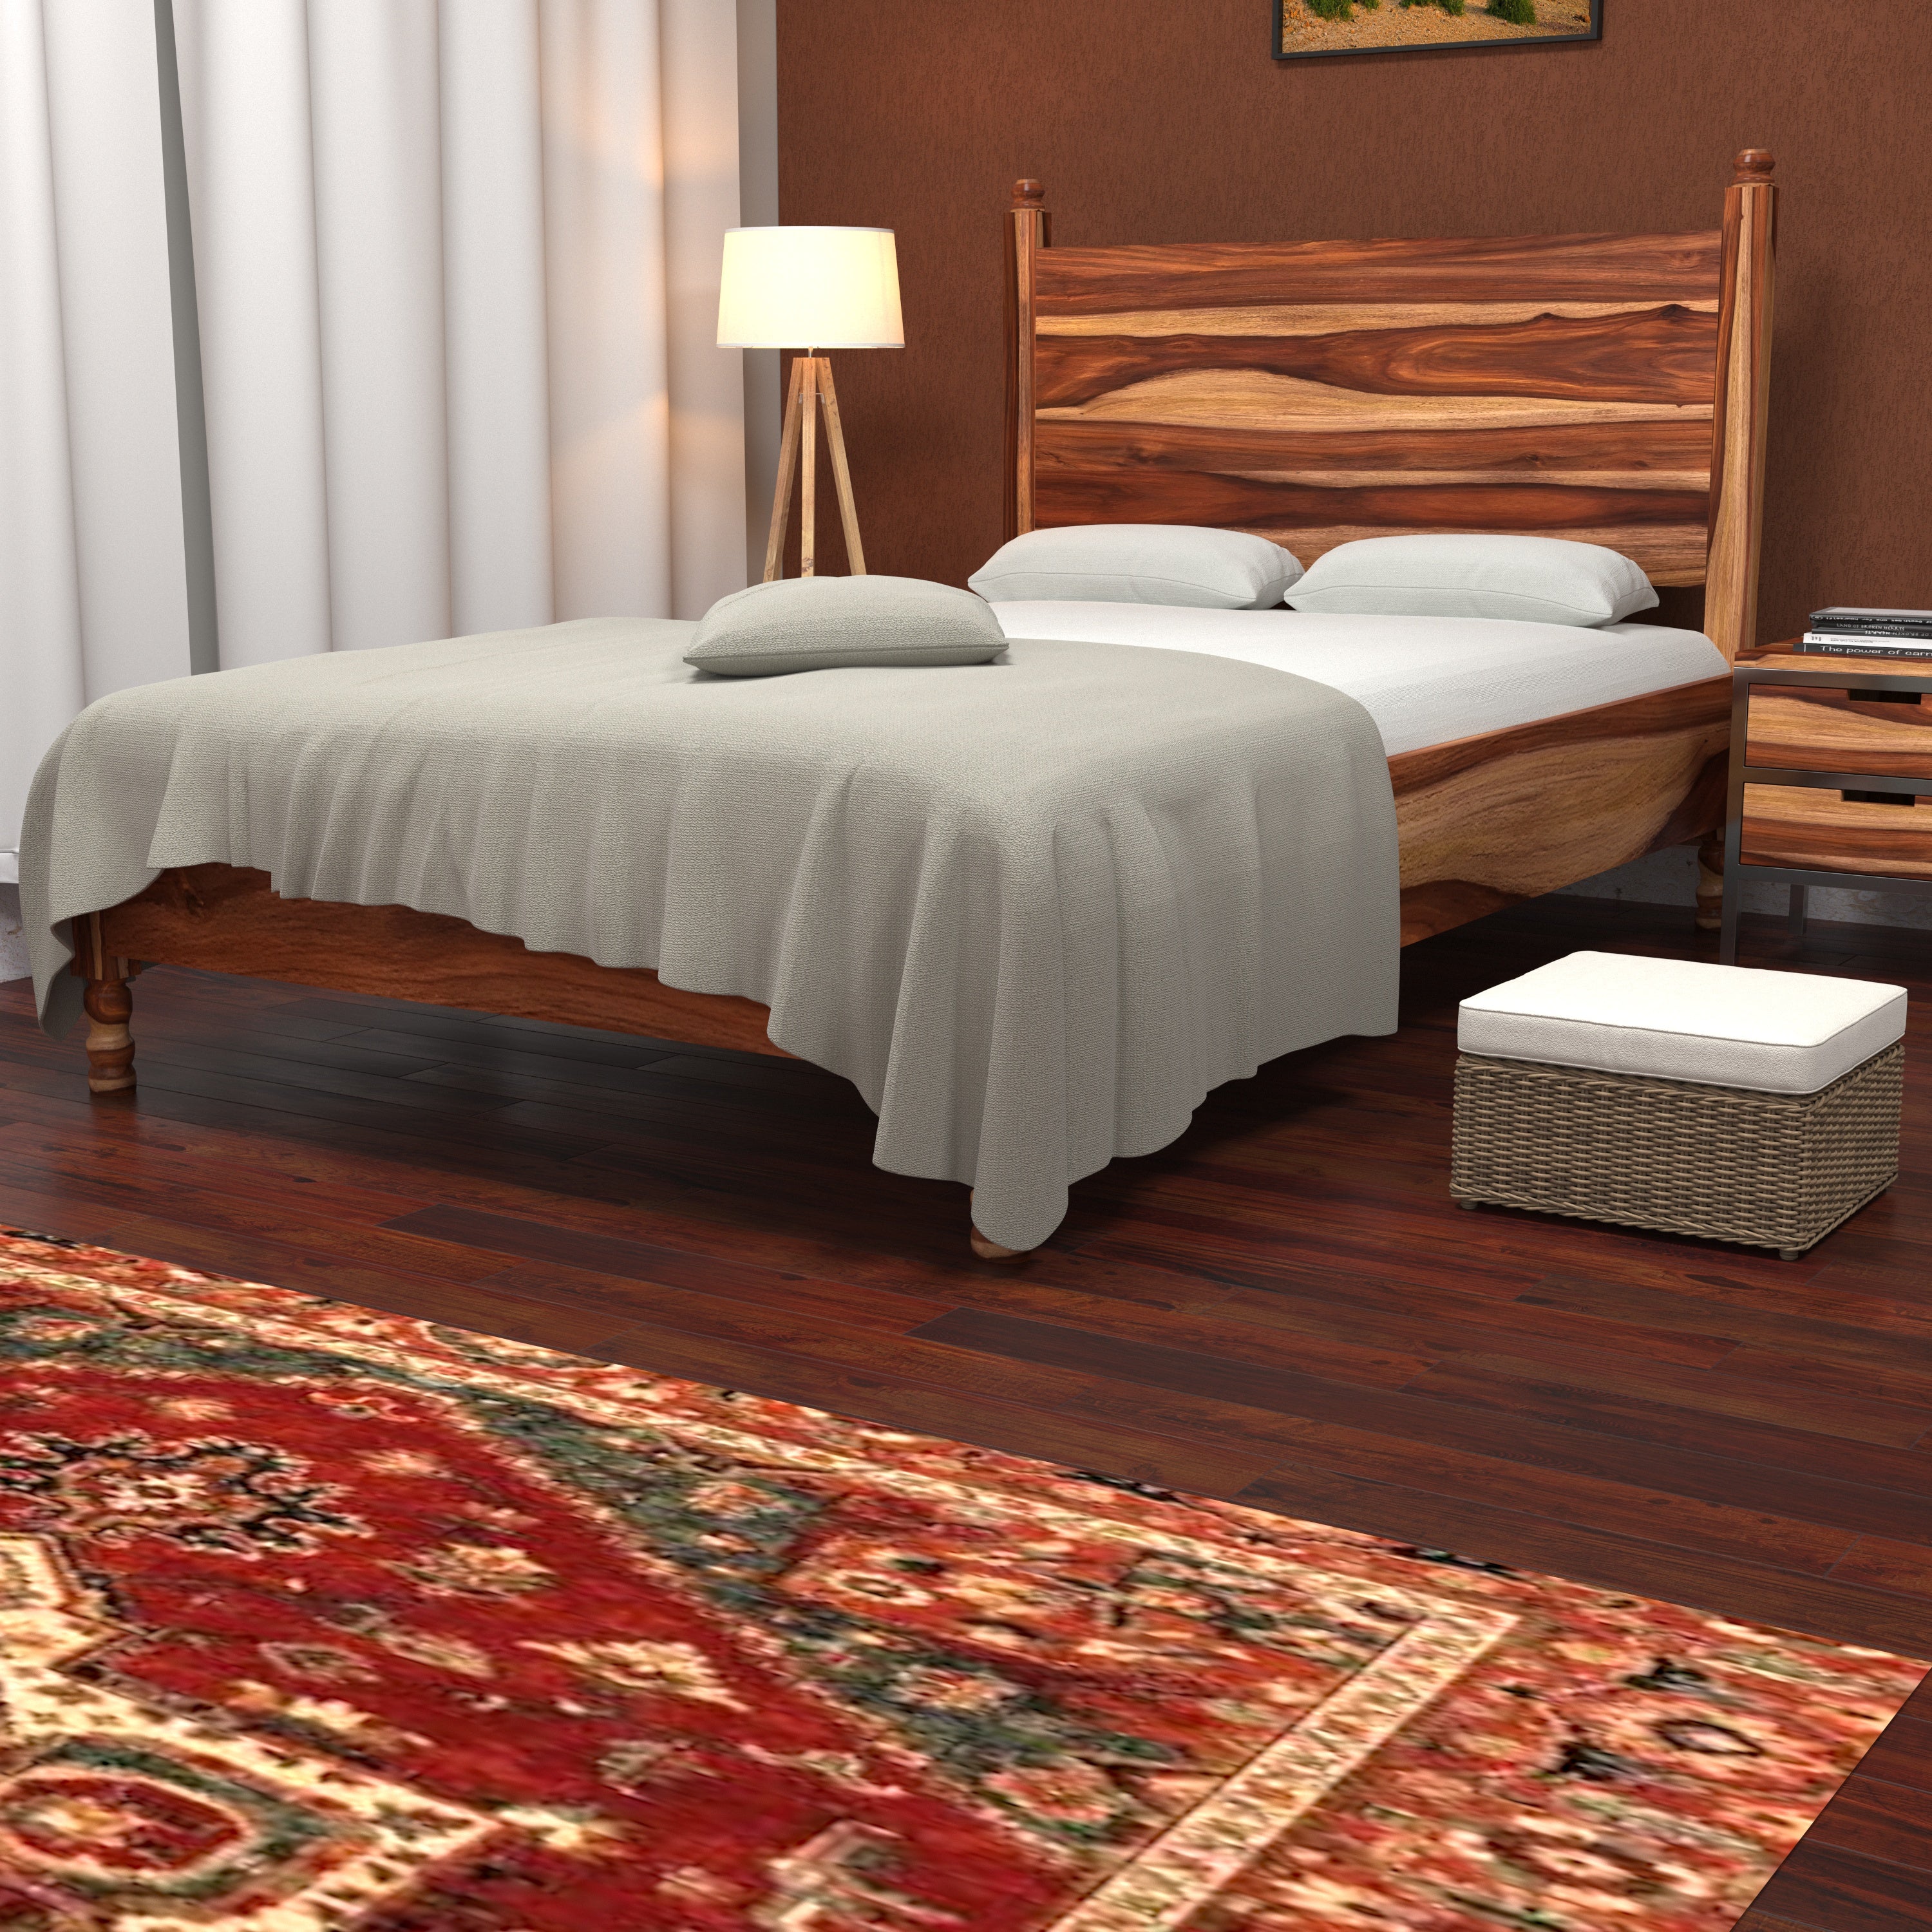 Charming Solid wood American Single Bed Sheesham wood Bed